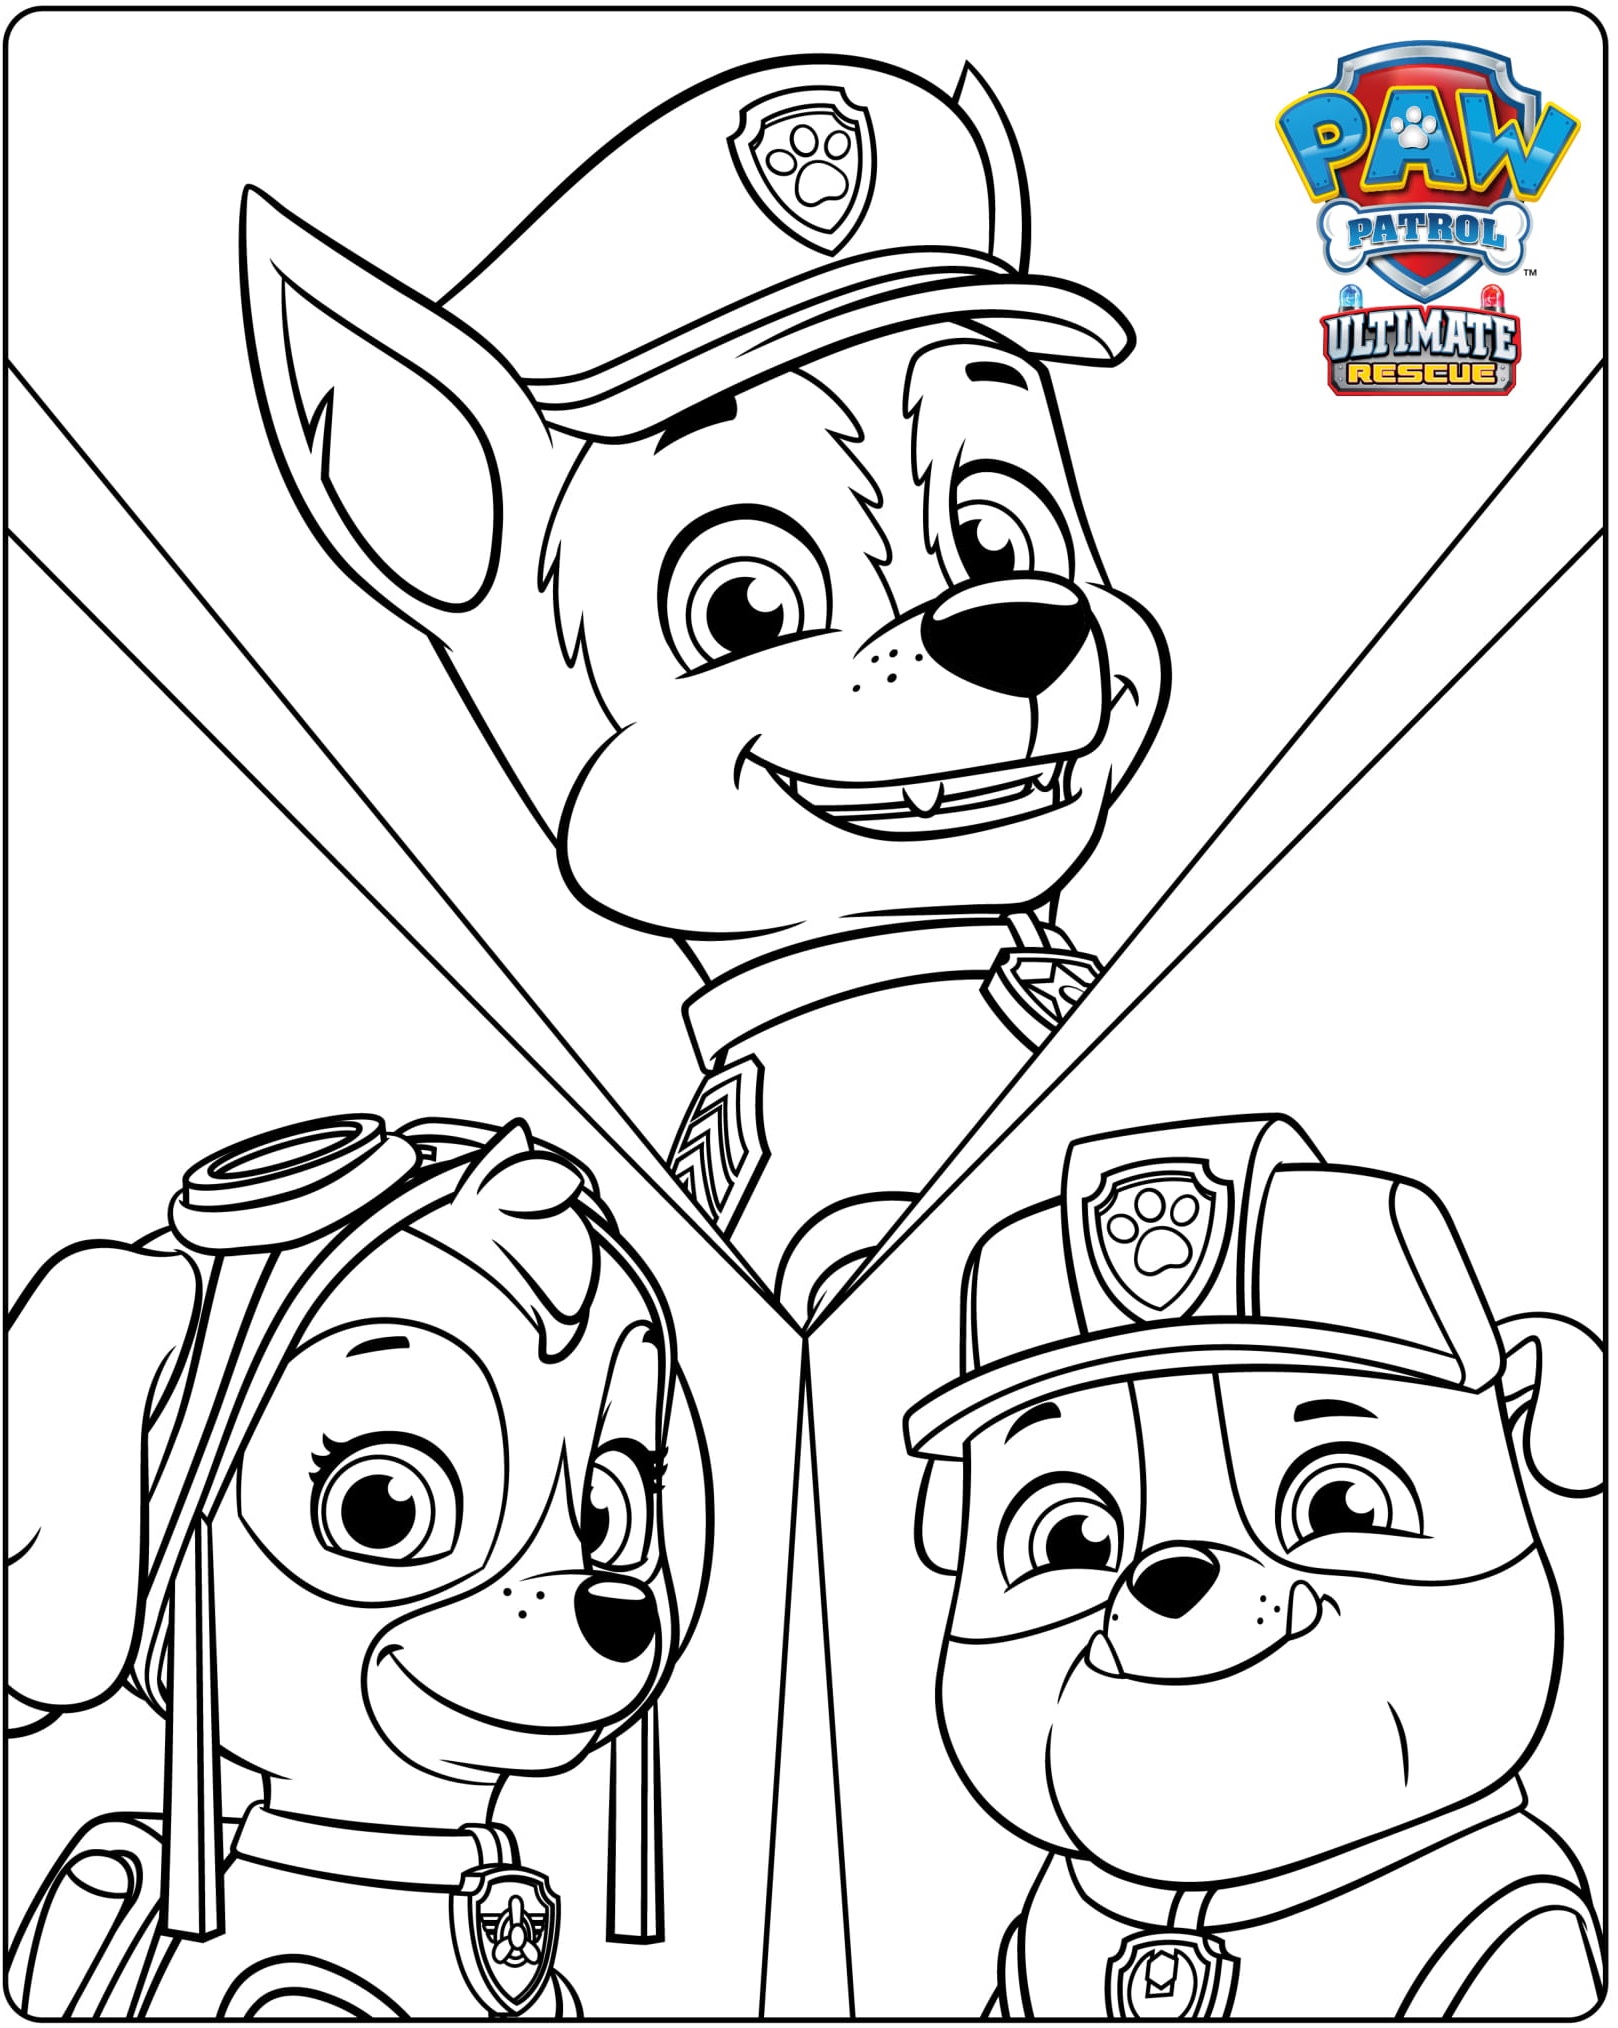 Paw Patrol Ultimate Rescue Chase Skye Rubble Coloring Page